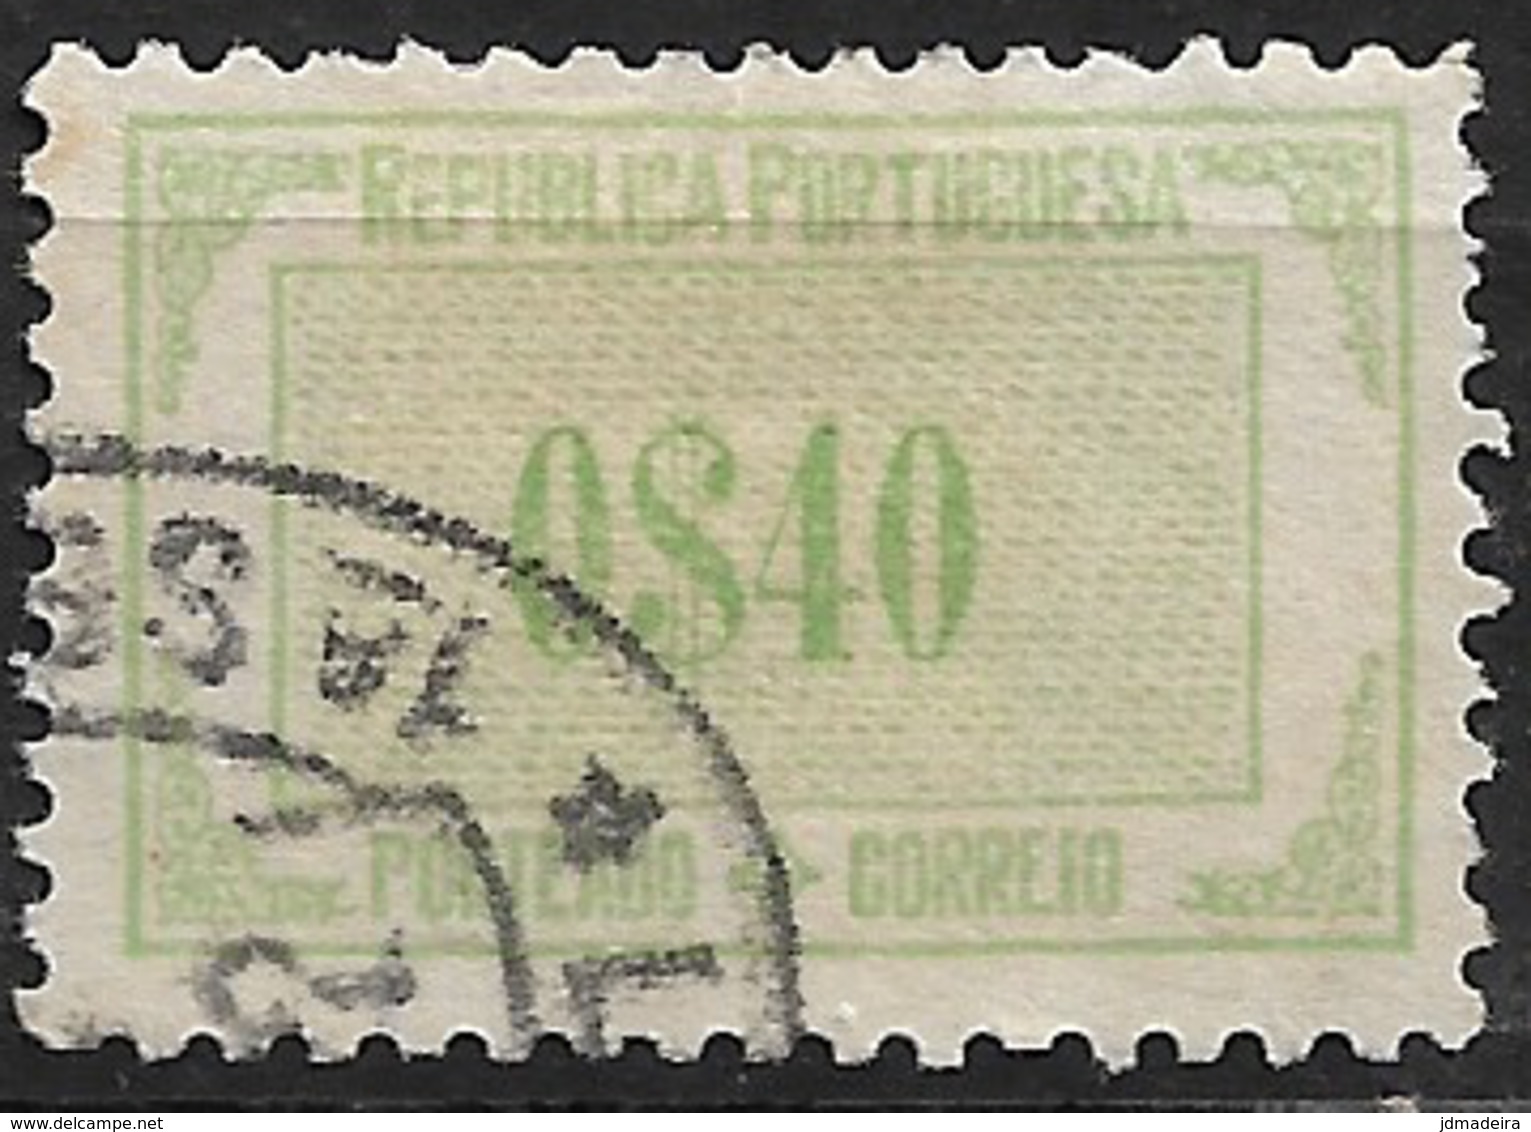 Portugal – 1932 Postage Due 0$40 Used Stamp - Used Stamps